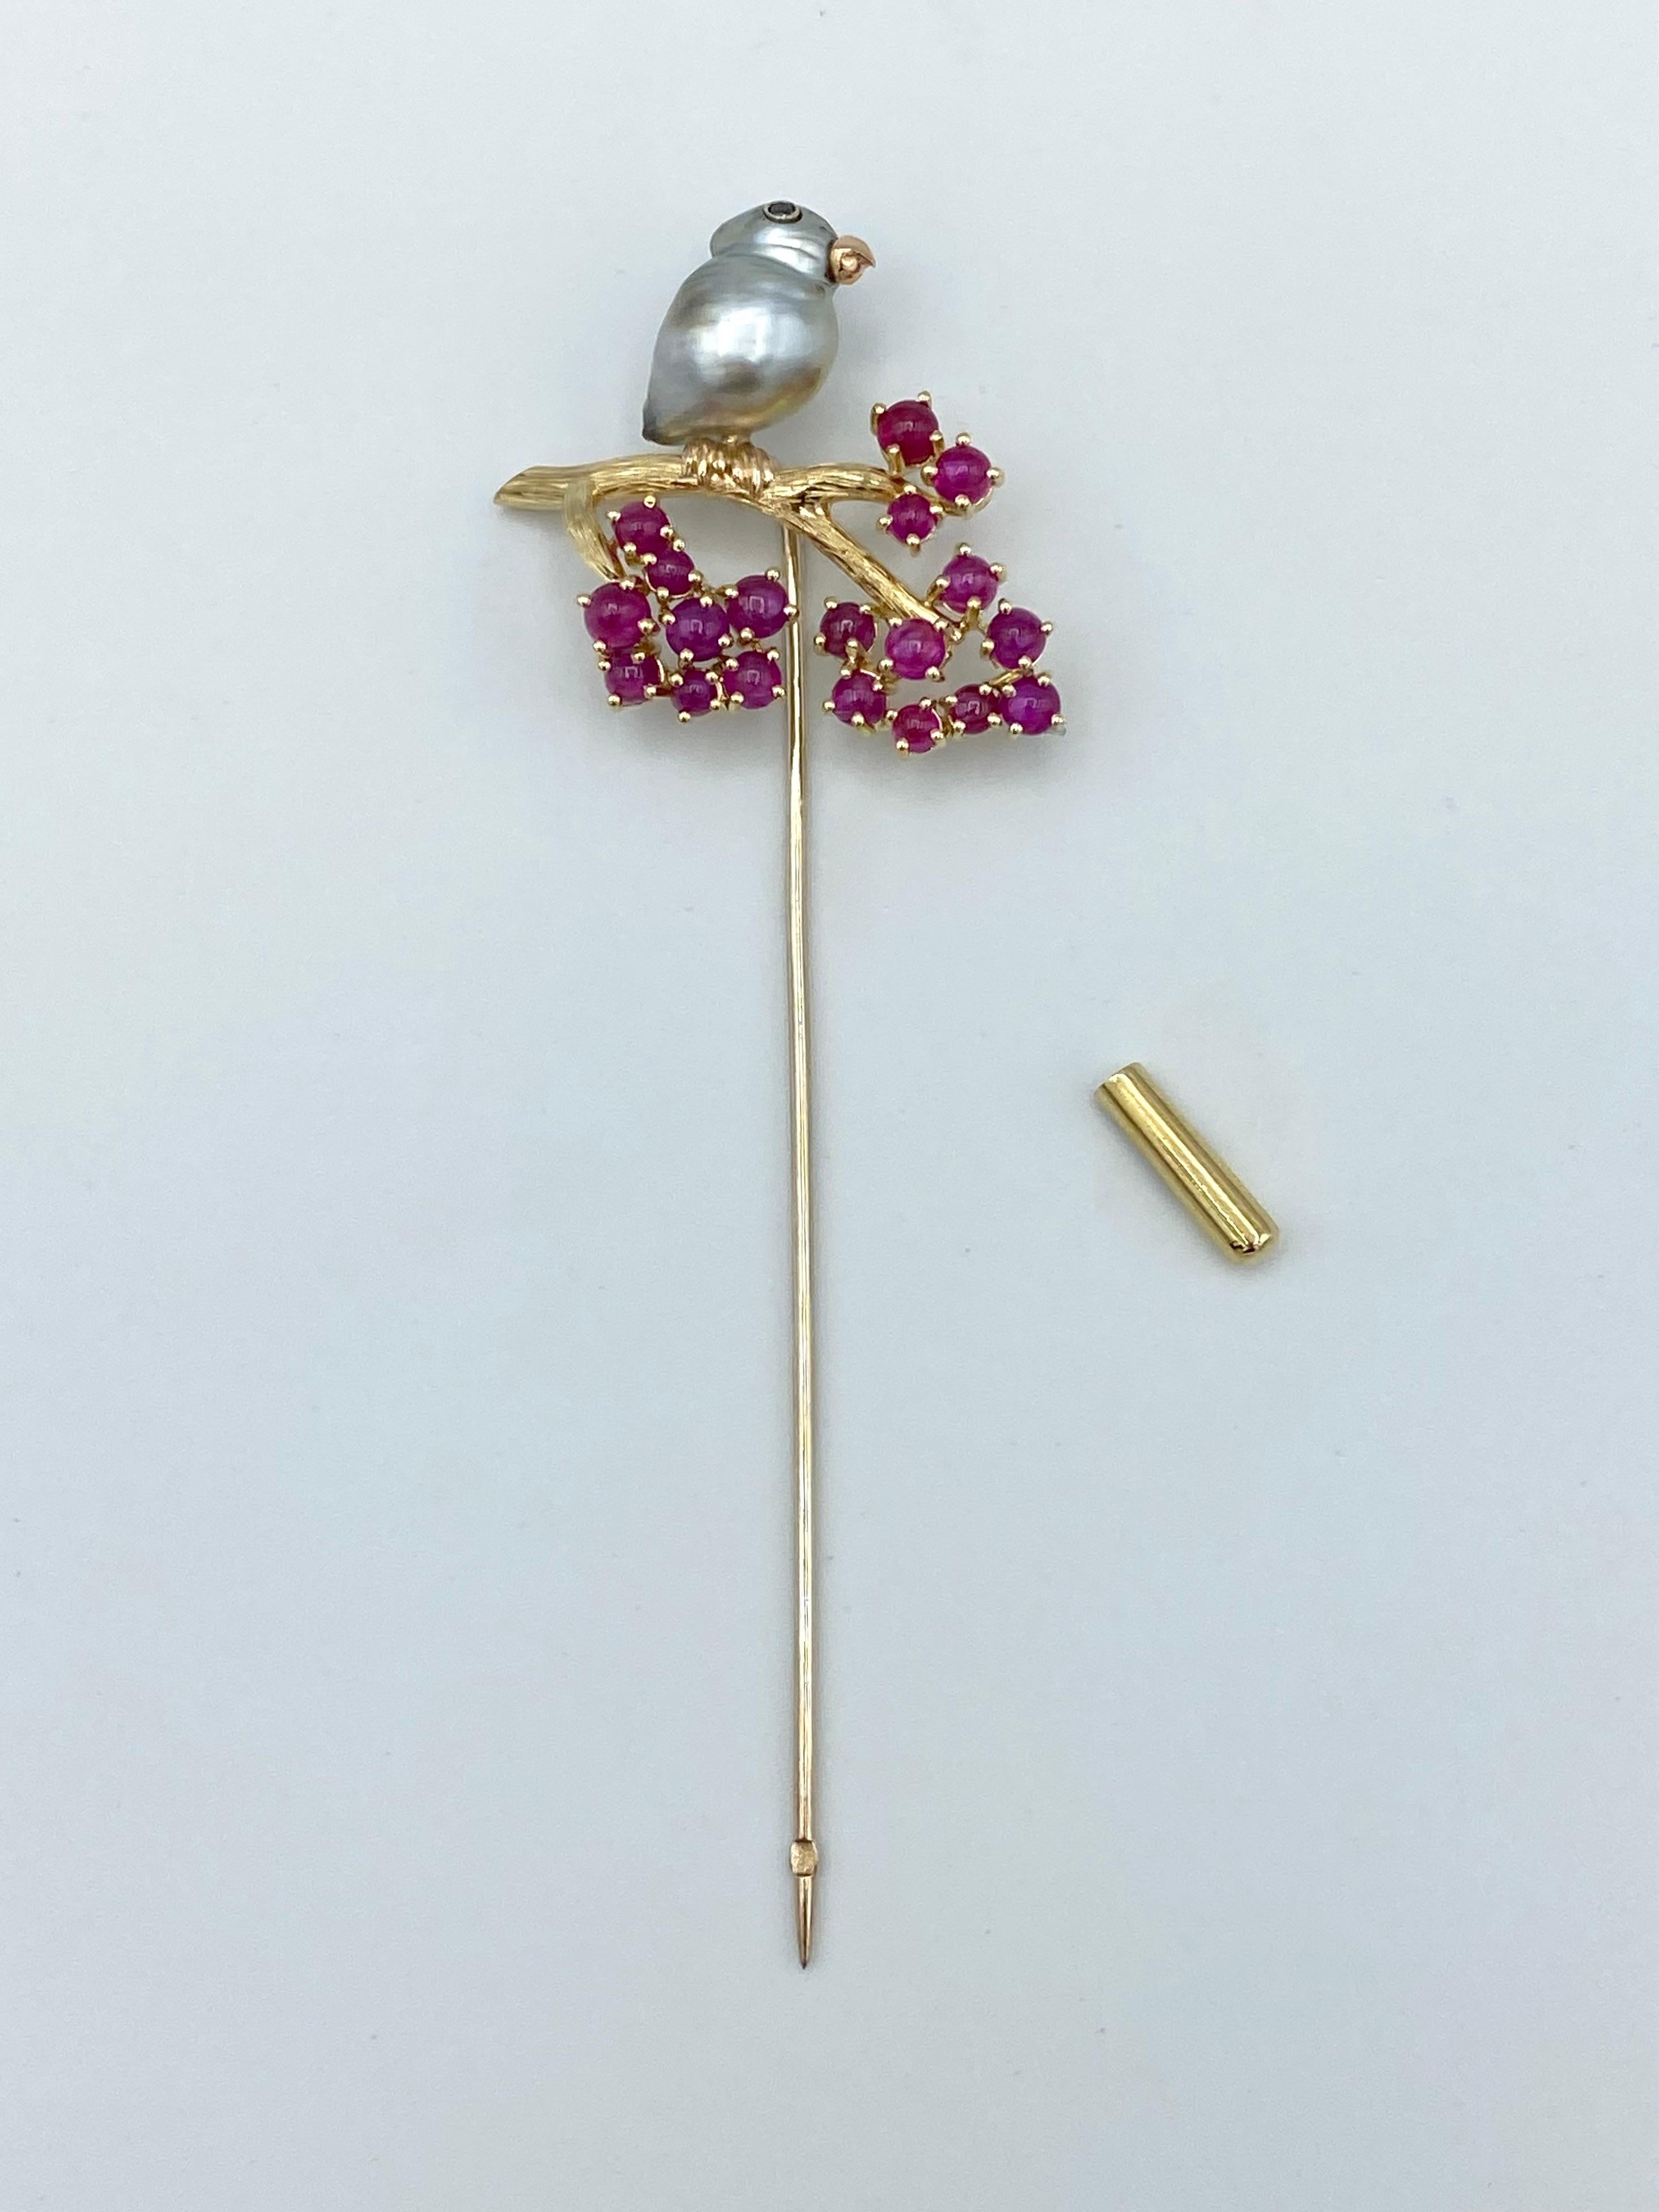 White Black Diamond Ruby Pin Stick Brooch 18Kt Gold Keshi Tahitian Pearl
This brooch is a hand engraved yellow gold branch and has 19 cabochon rubies which like red winter berries color and adorn its ends.
At the beginning of the branch is a white